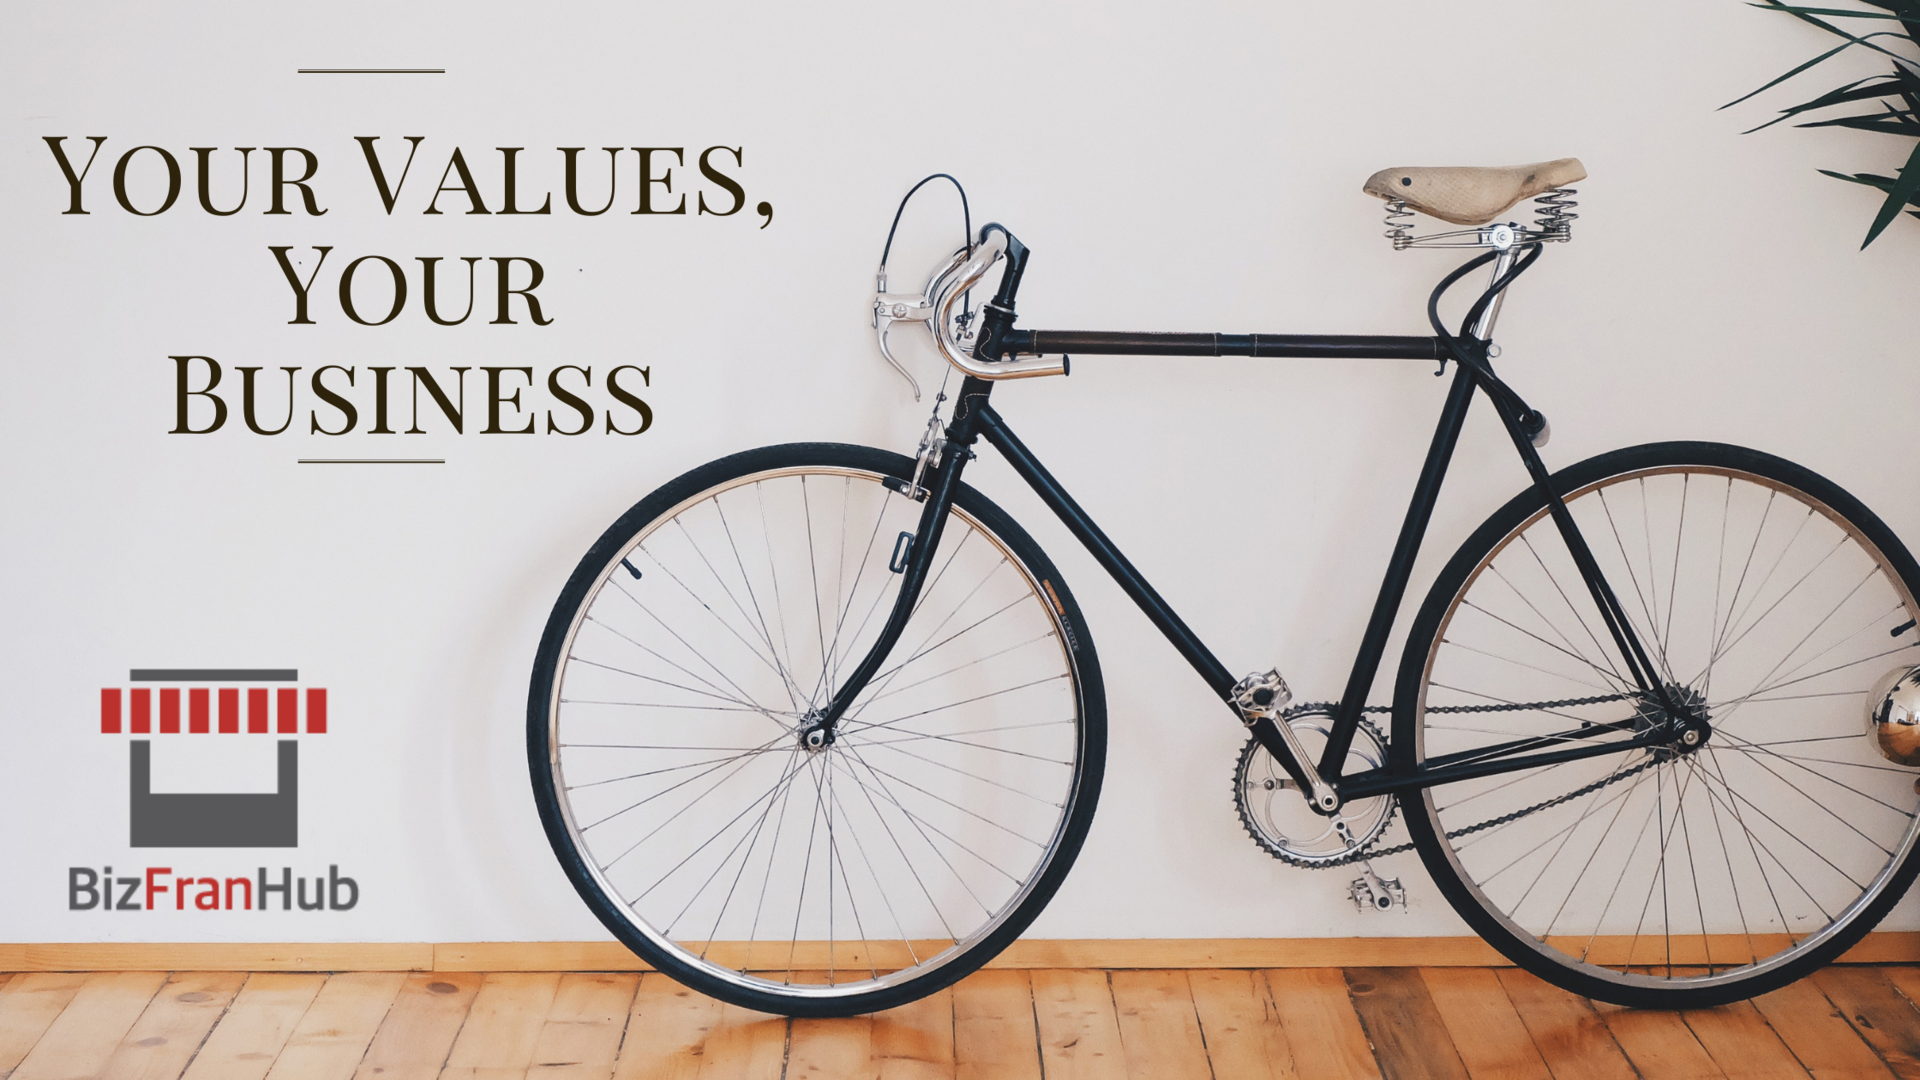 Your Values, Your Business.